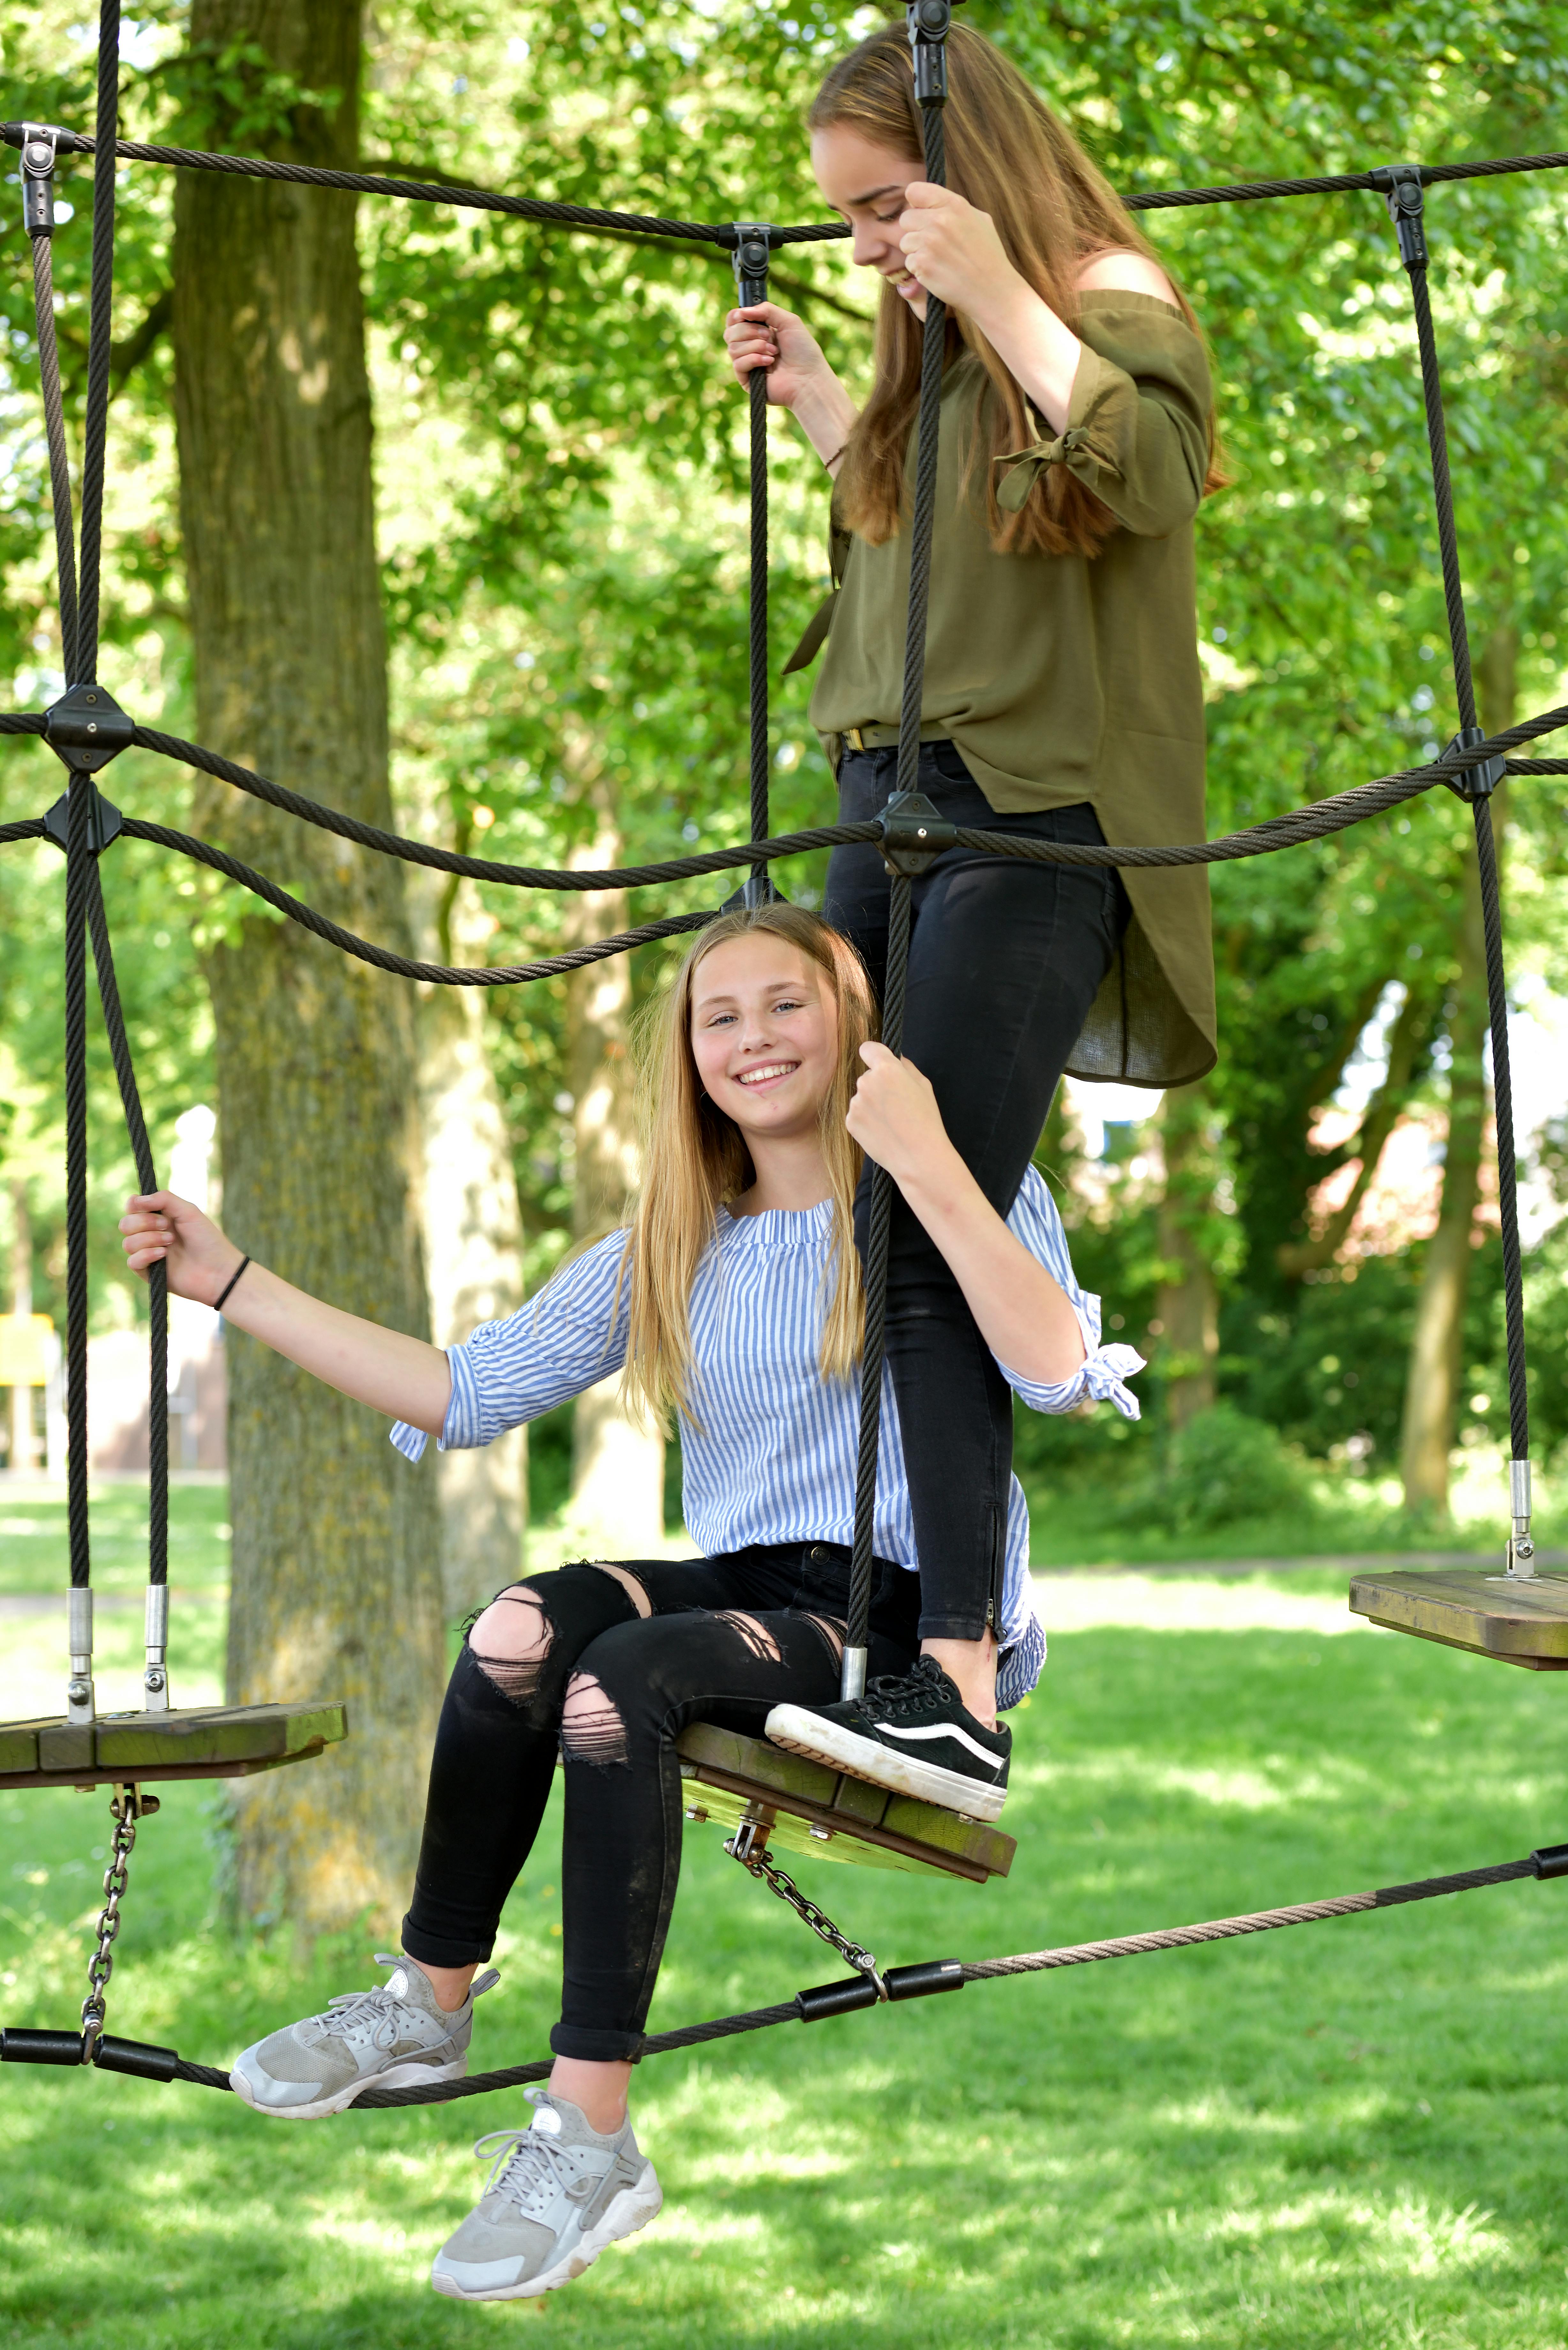 girls playing together at a playground